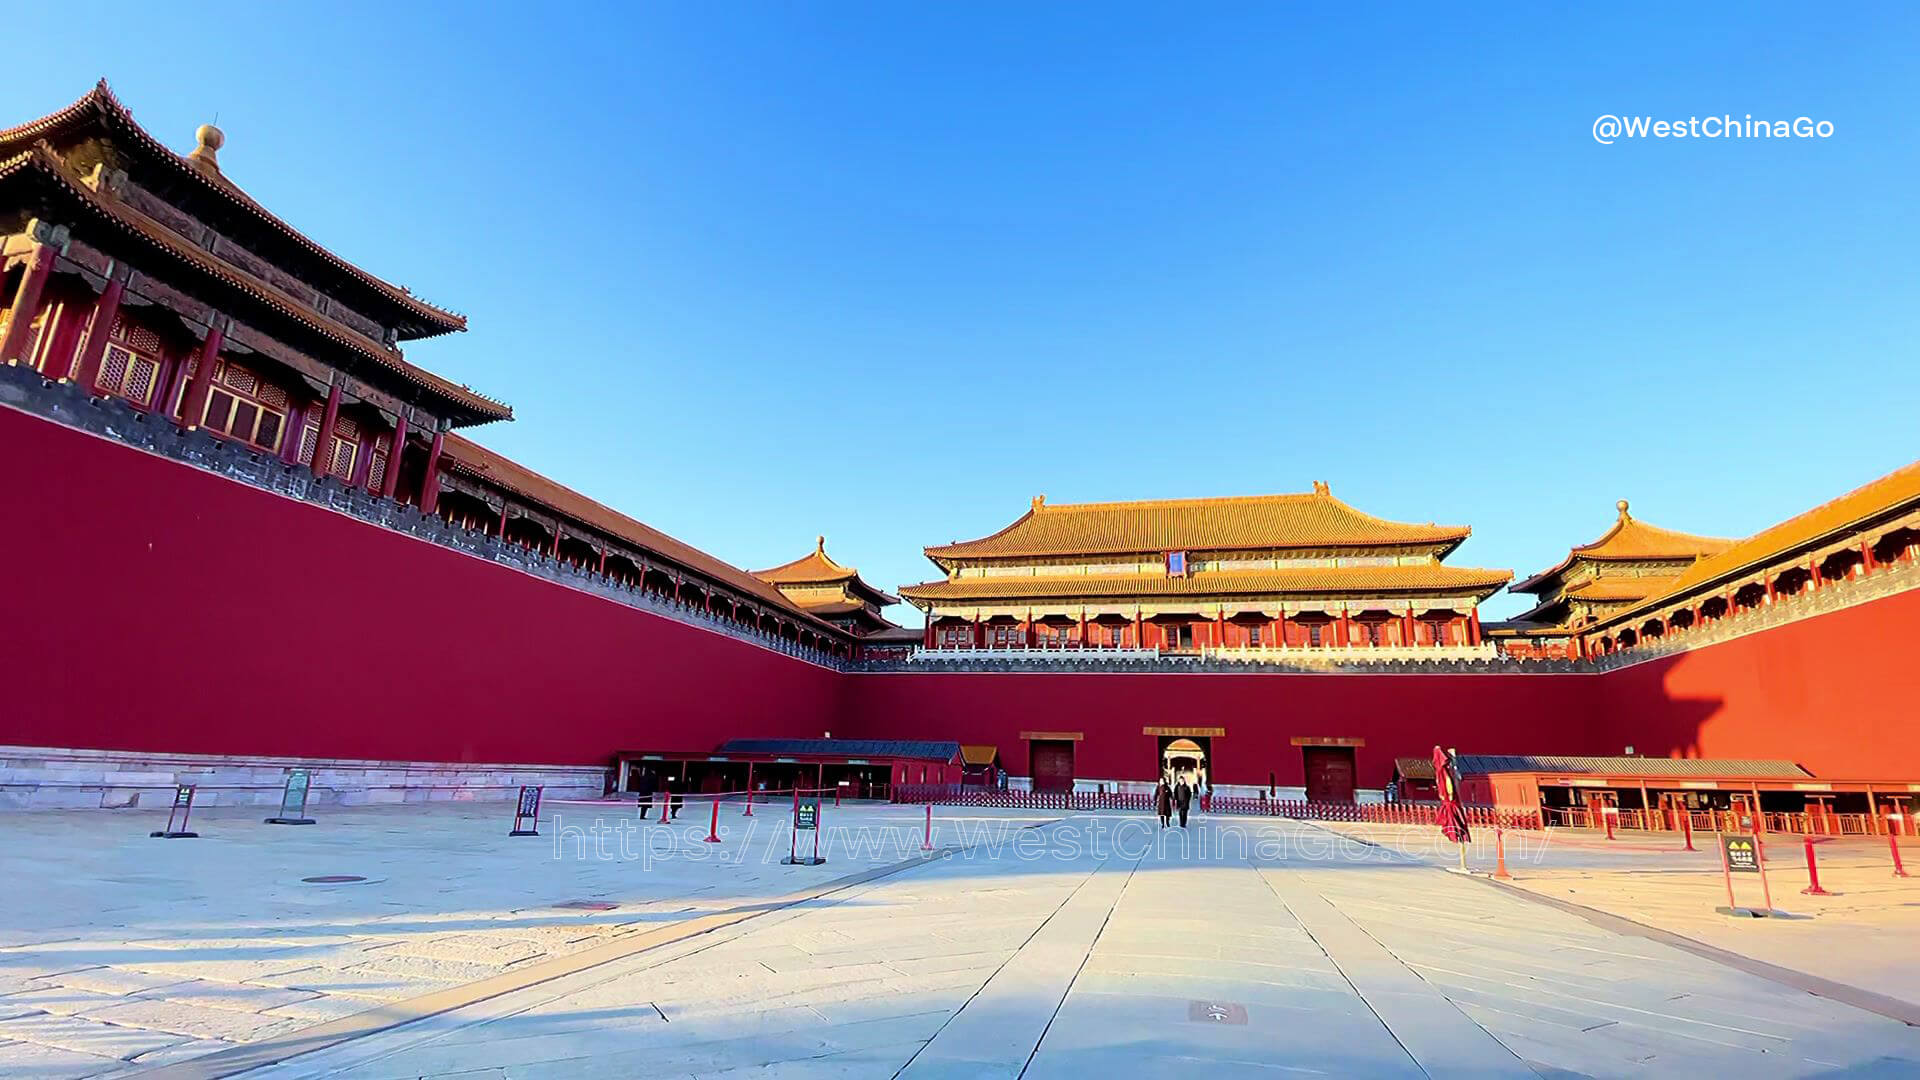 The Palace Museum